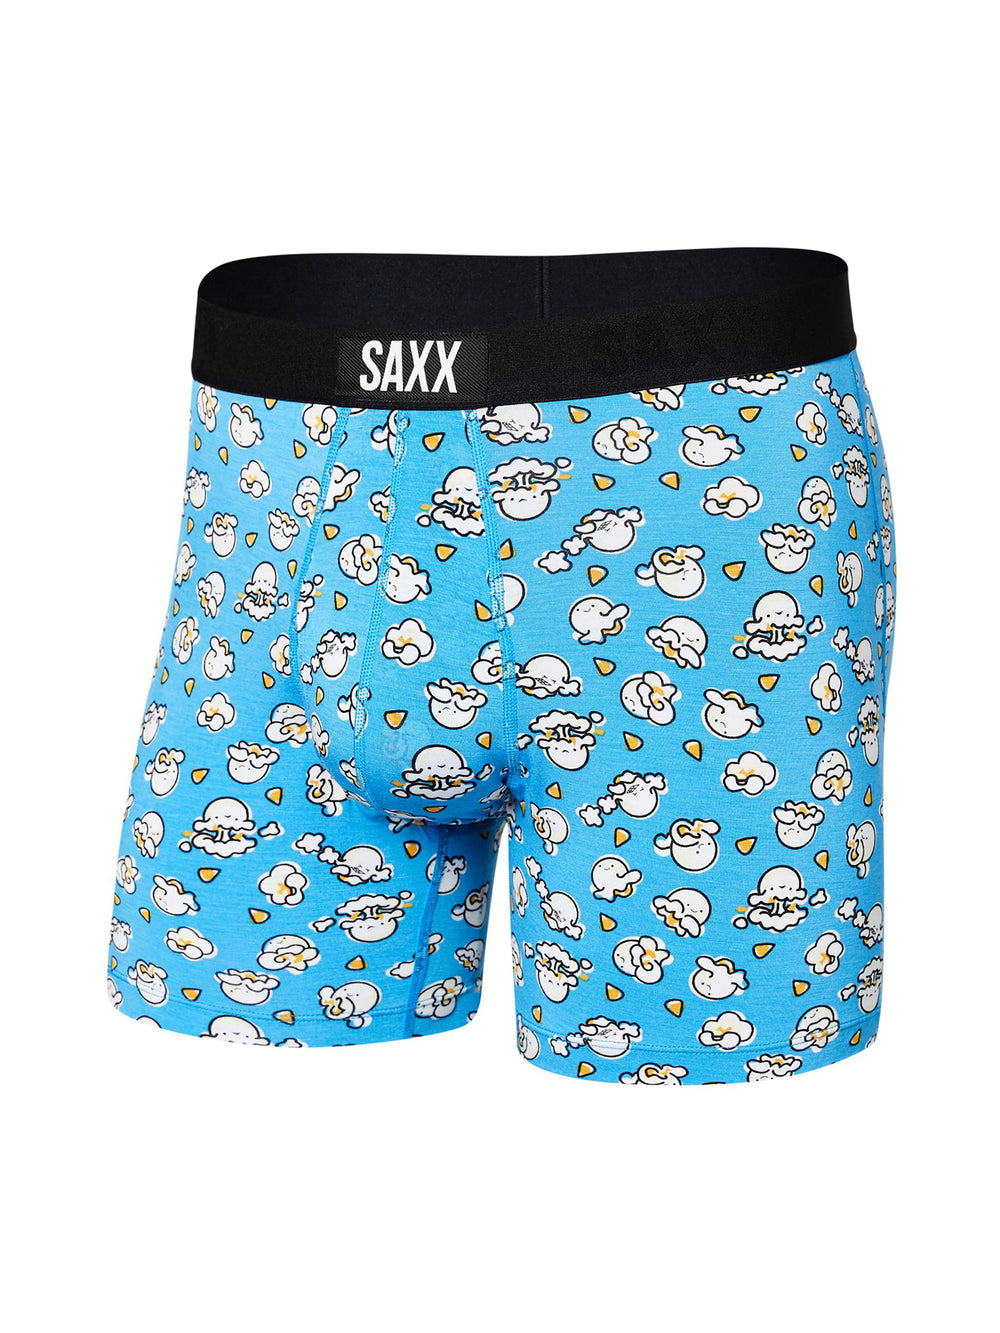 Boathouse SAXX ULTRA BOXER BRIEF - CLEARANCE